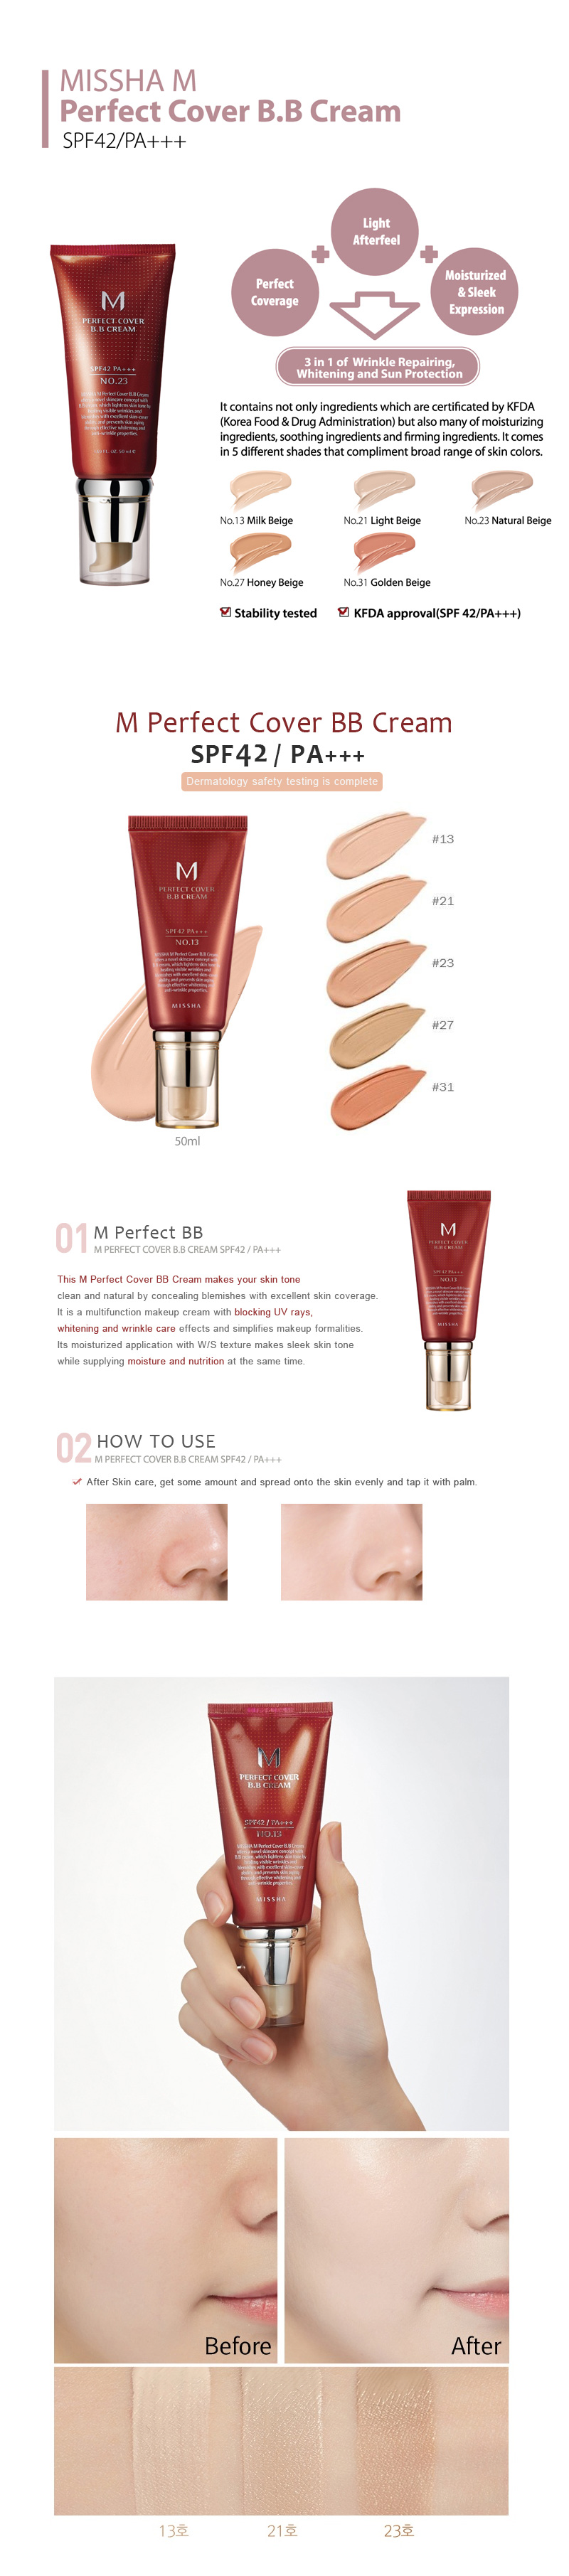 M Perfect Cover BB Cream SPF 42 PA+++ ShopandShop - India Life Style Shop